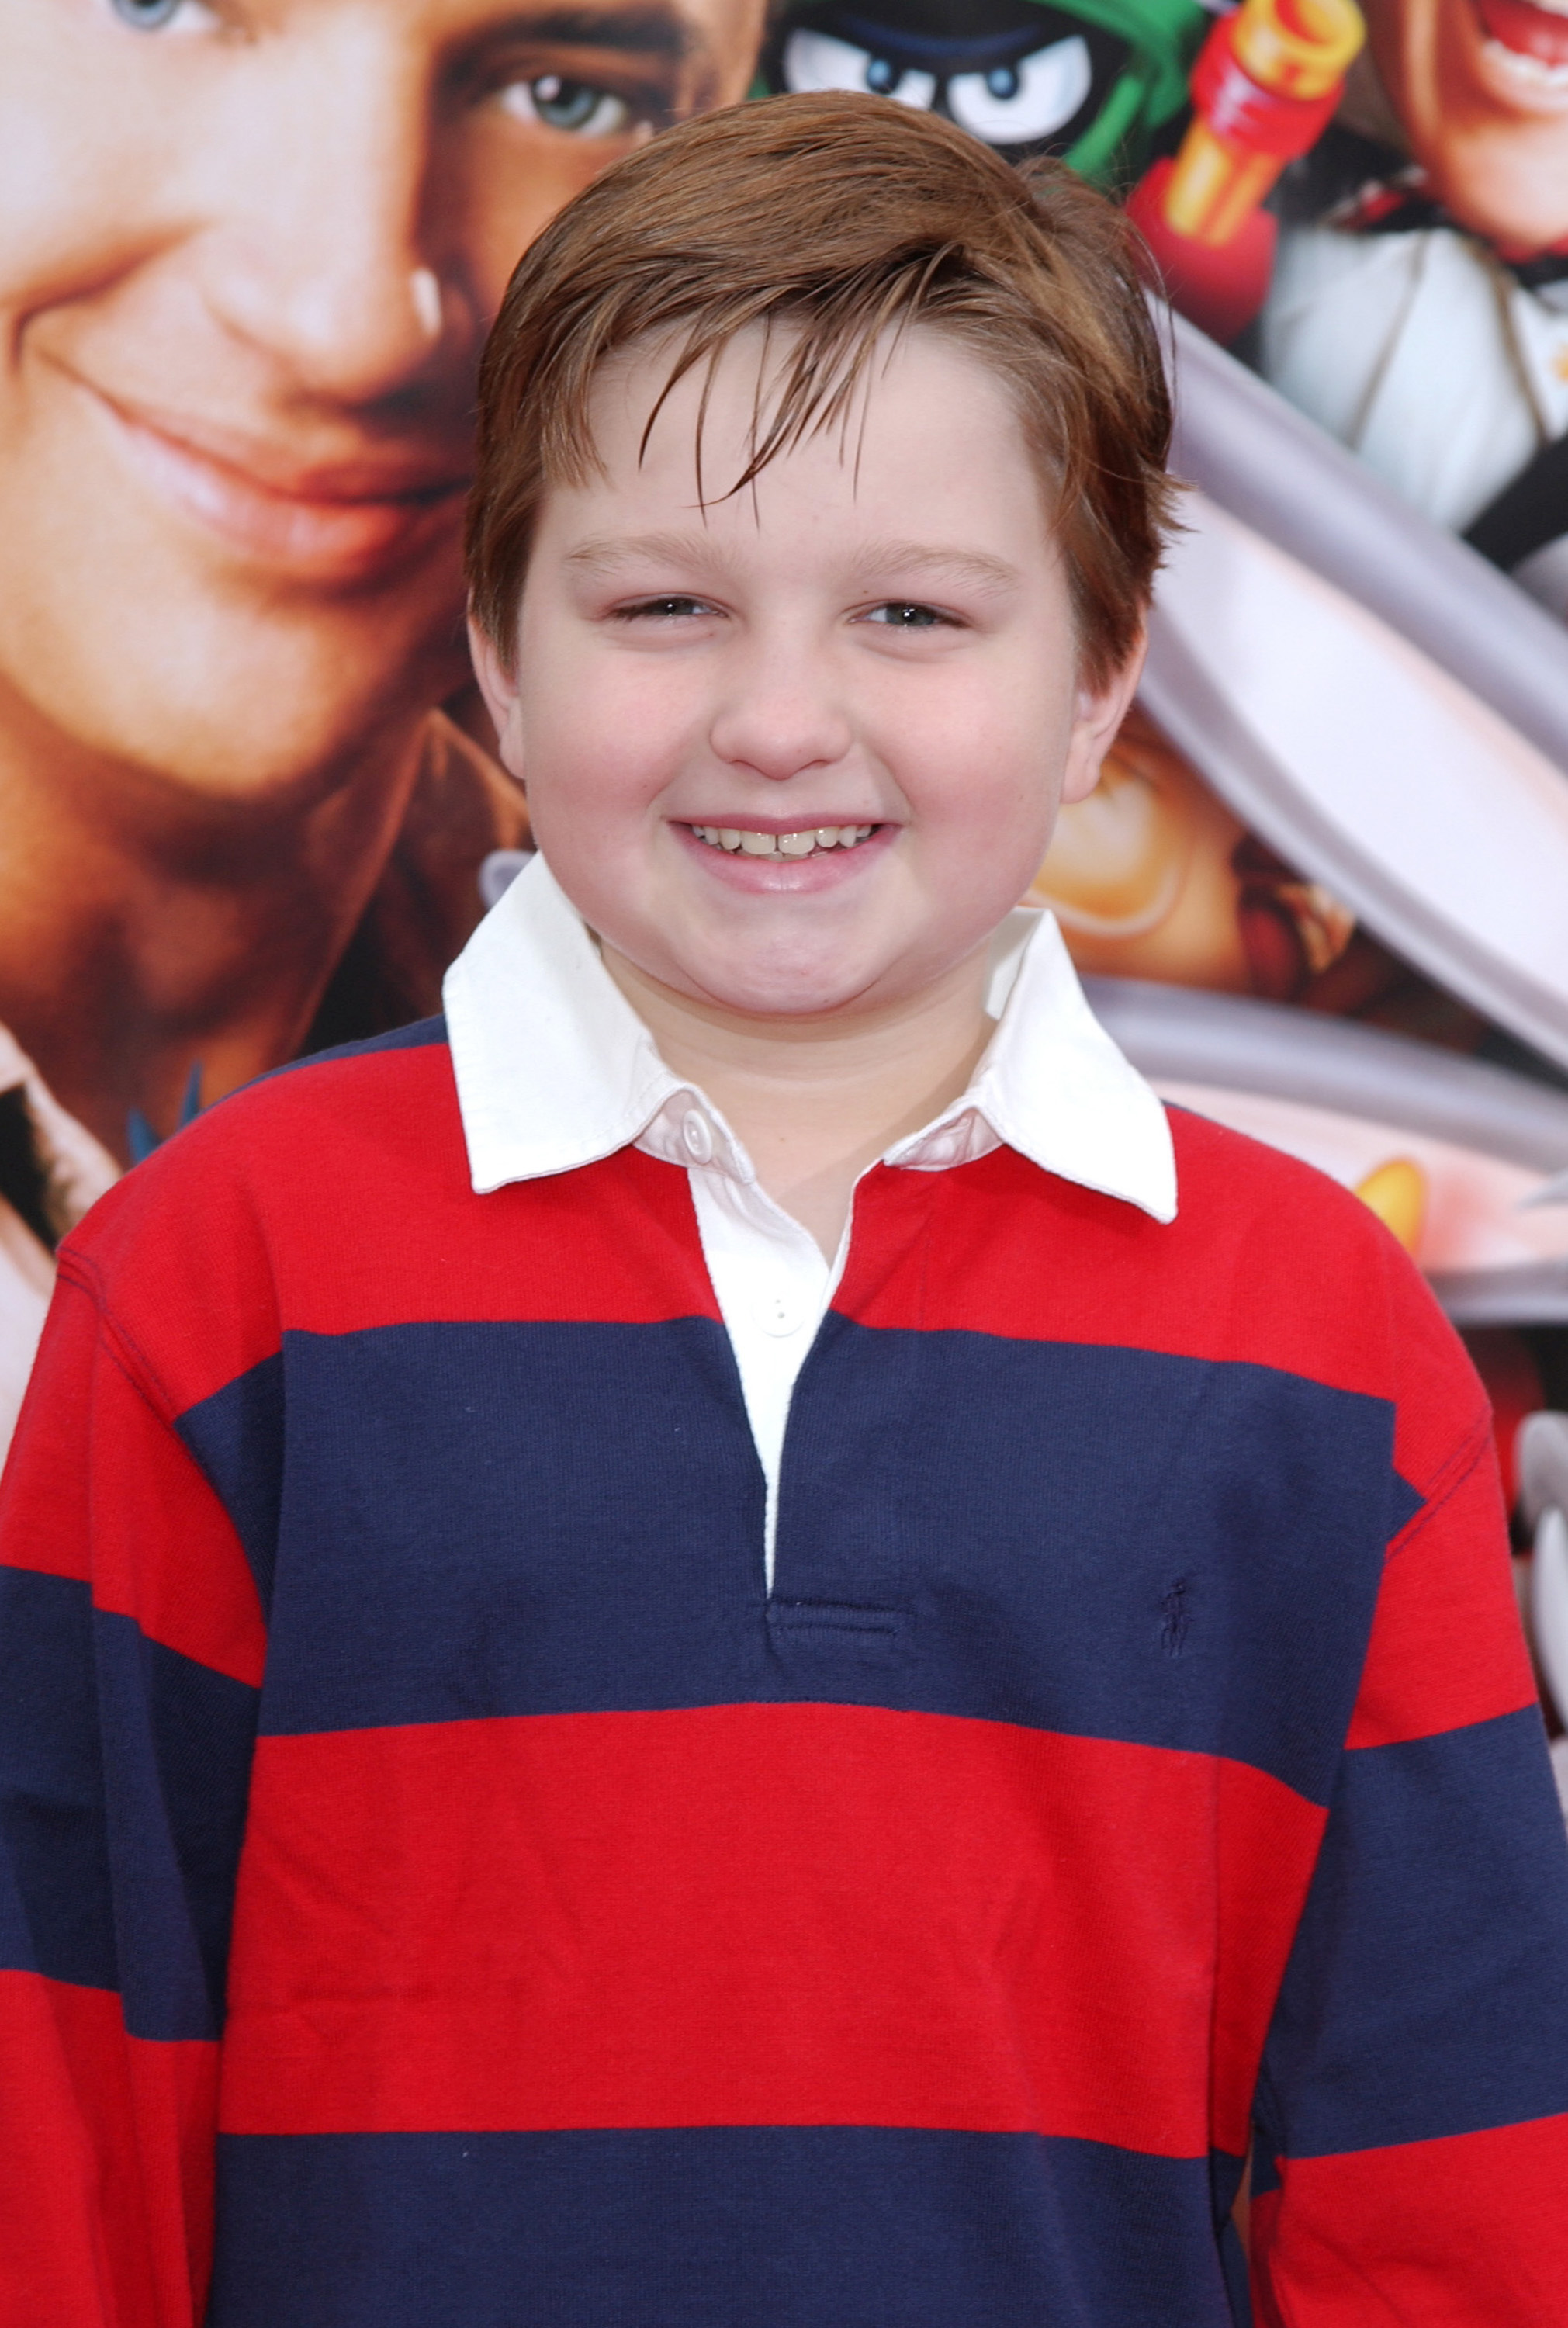 Angus T. Jones the Premiere of "Looney Tunes Back In Action" in Los Angeles in 2003 | Source: Getty Images